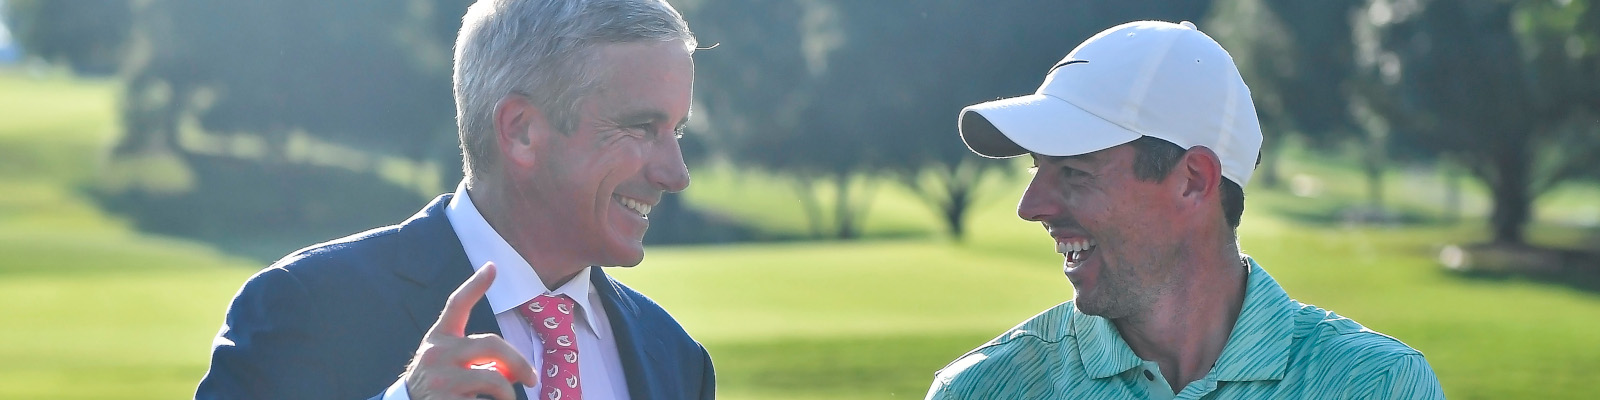 Jay Monahan und Rory McIlroy (Photo by Austin McAfee/Icon Sportswire via Getty Images)